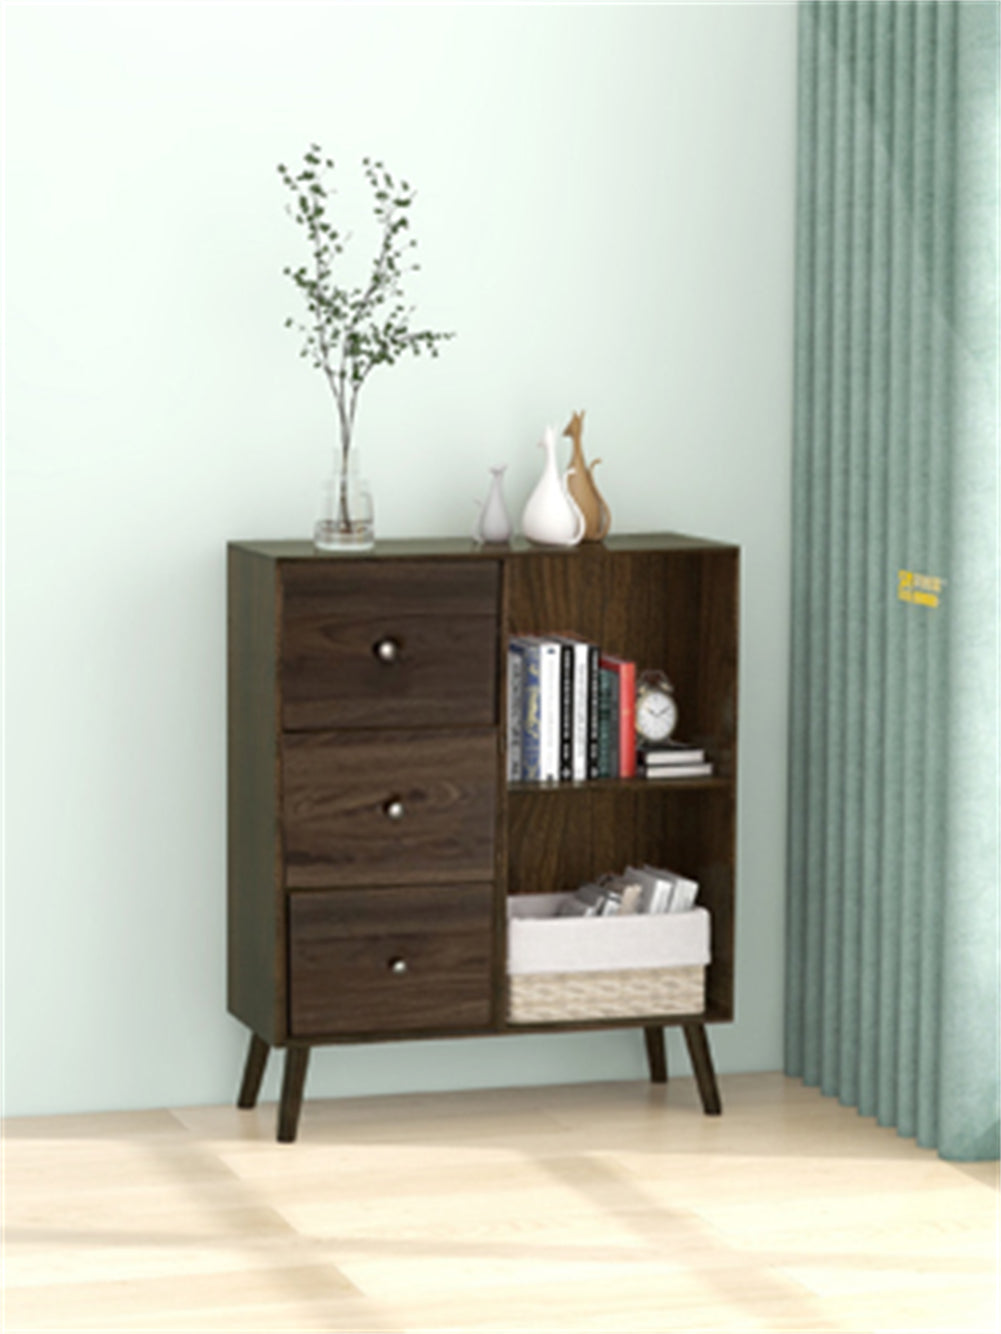 Locking Filing Cabinet with 2 Open Shelves with 3 Drawers